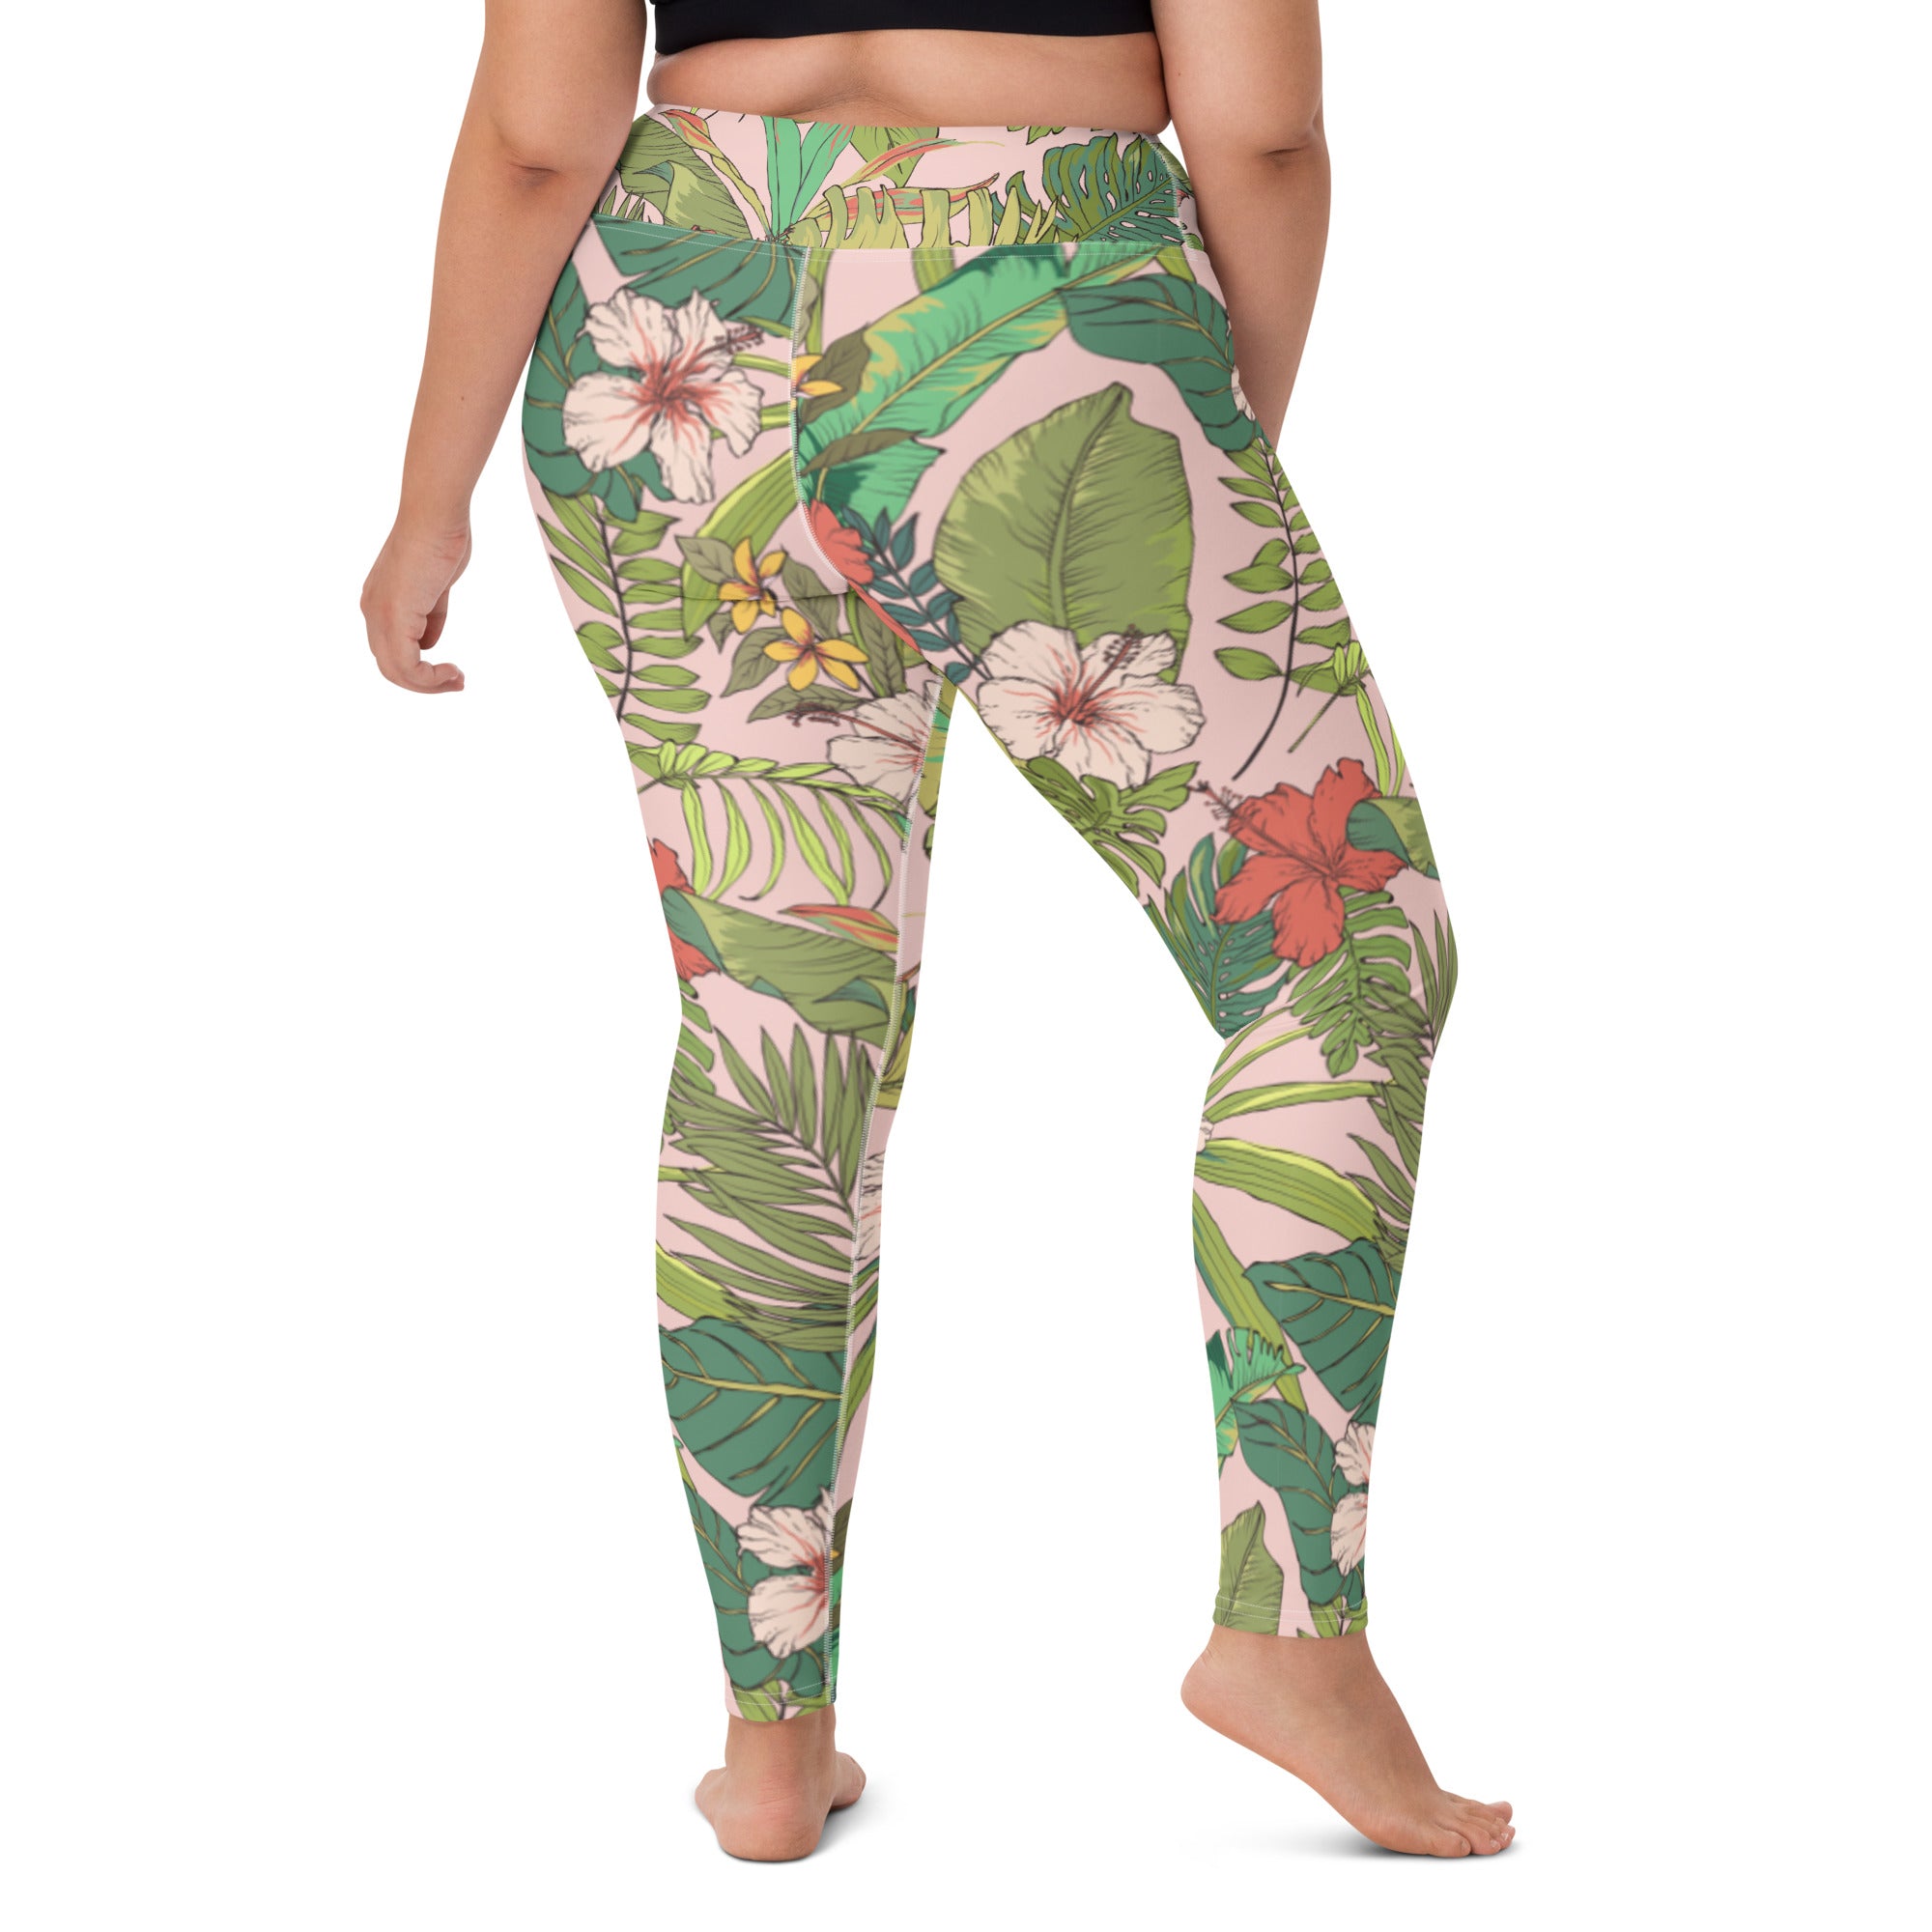 Floral Paradise High Waist Legging In Airy Blue • Impressions